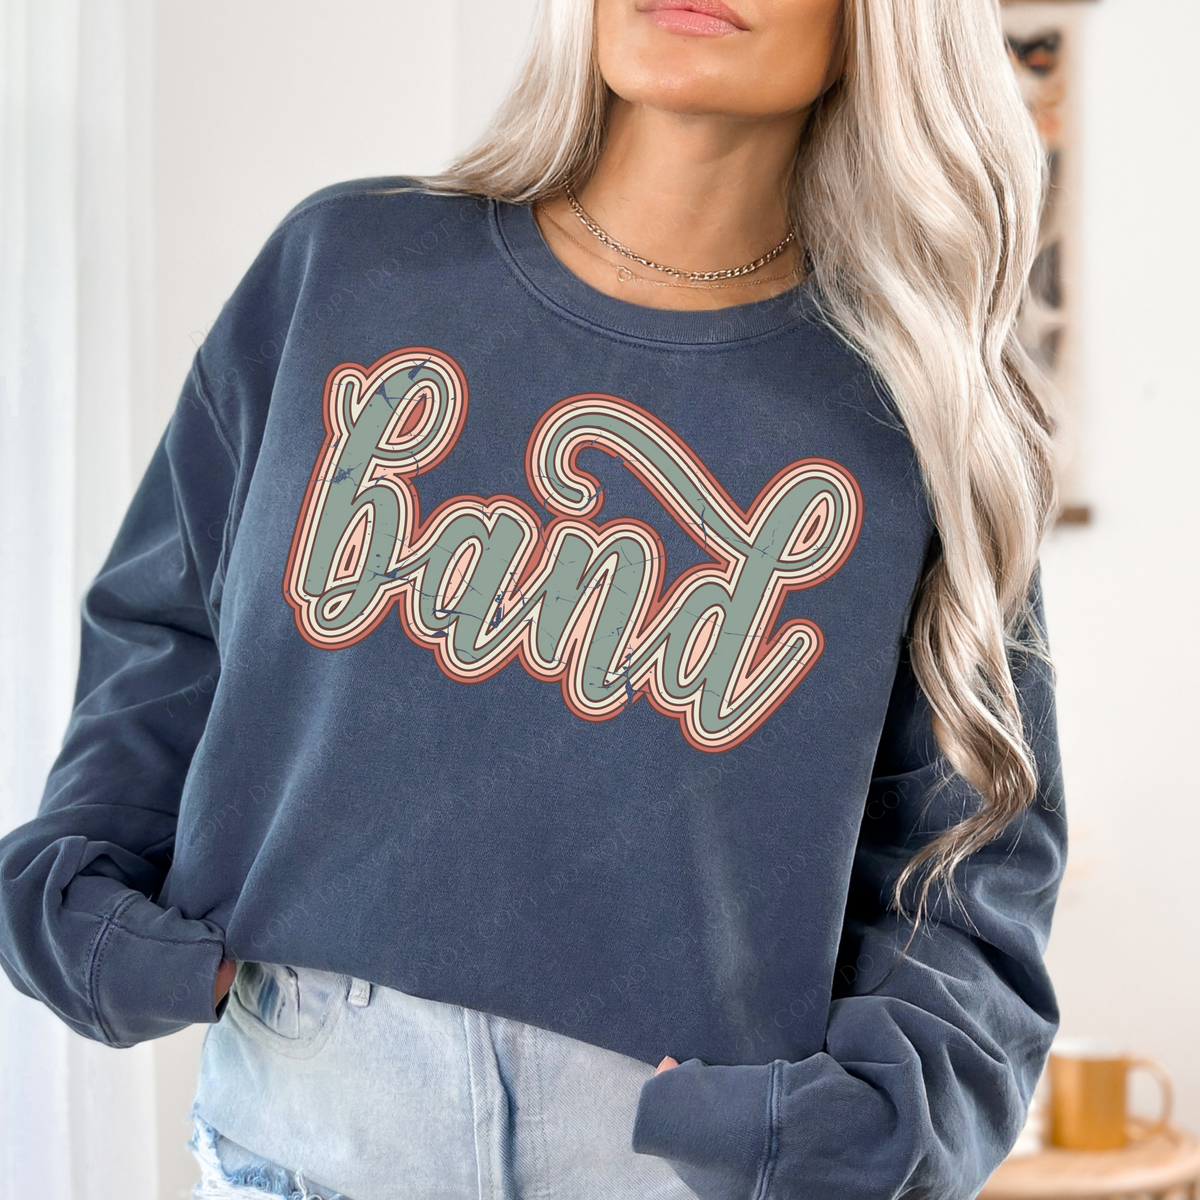 Band Boho Scroll Stacked Distressed in Muted Boho Colors Digital Design, PNG Only